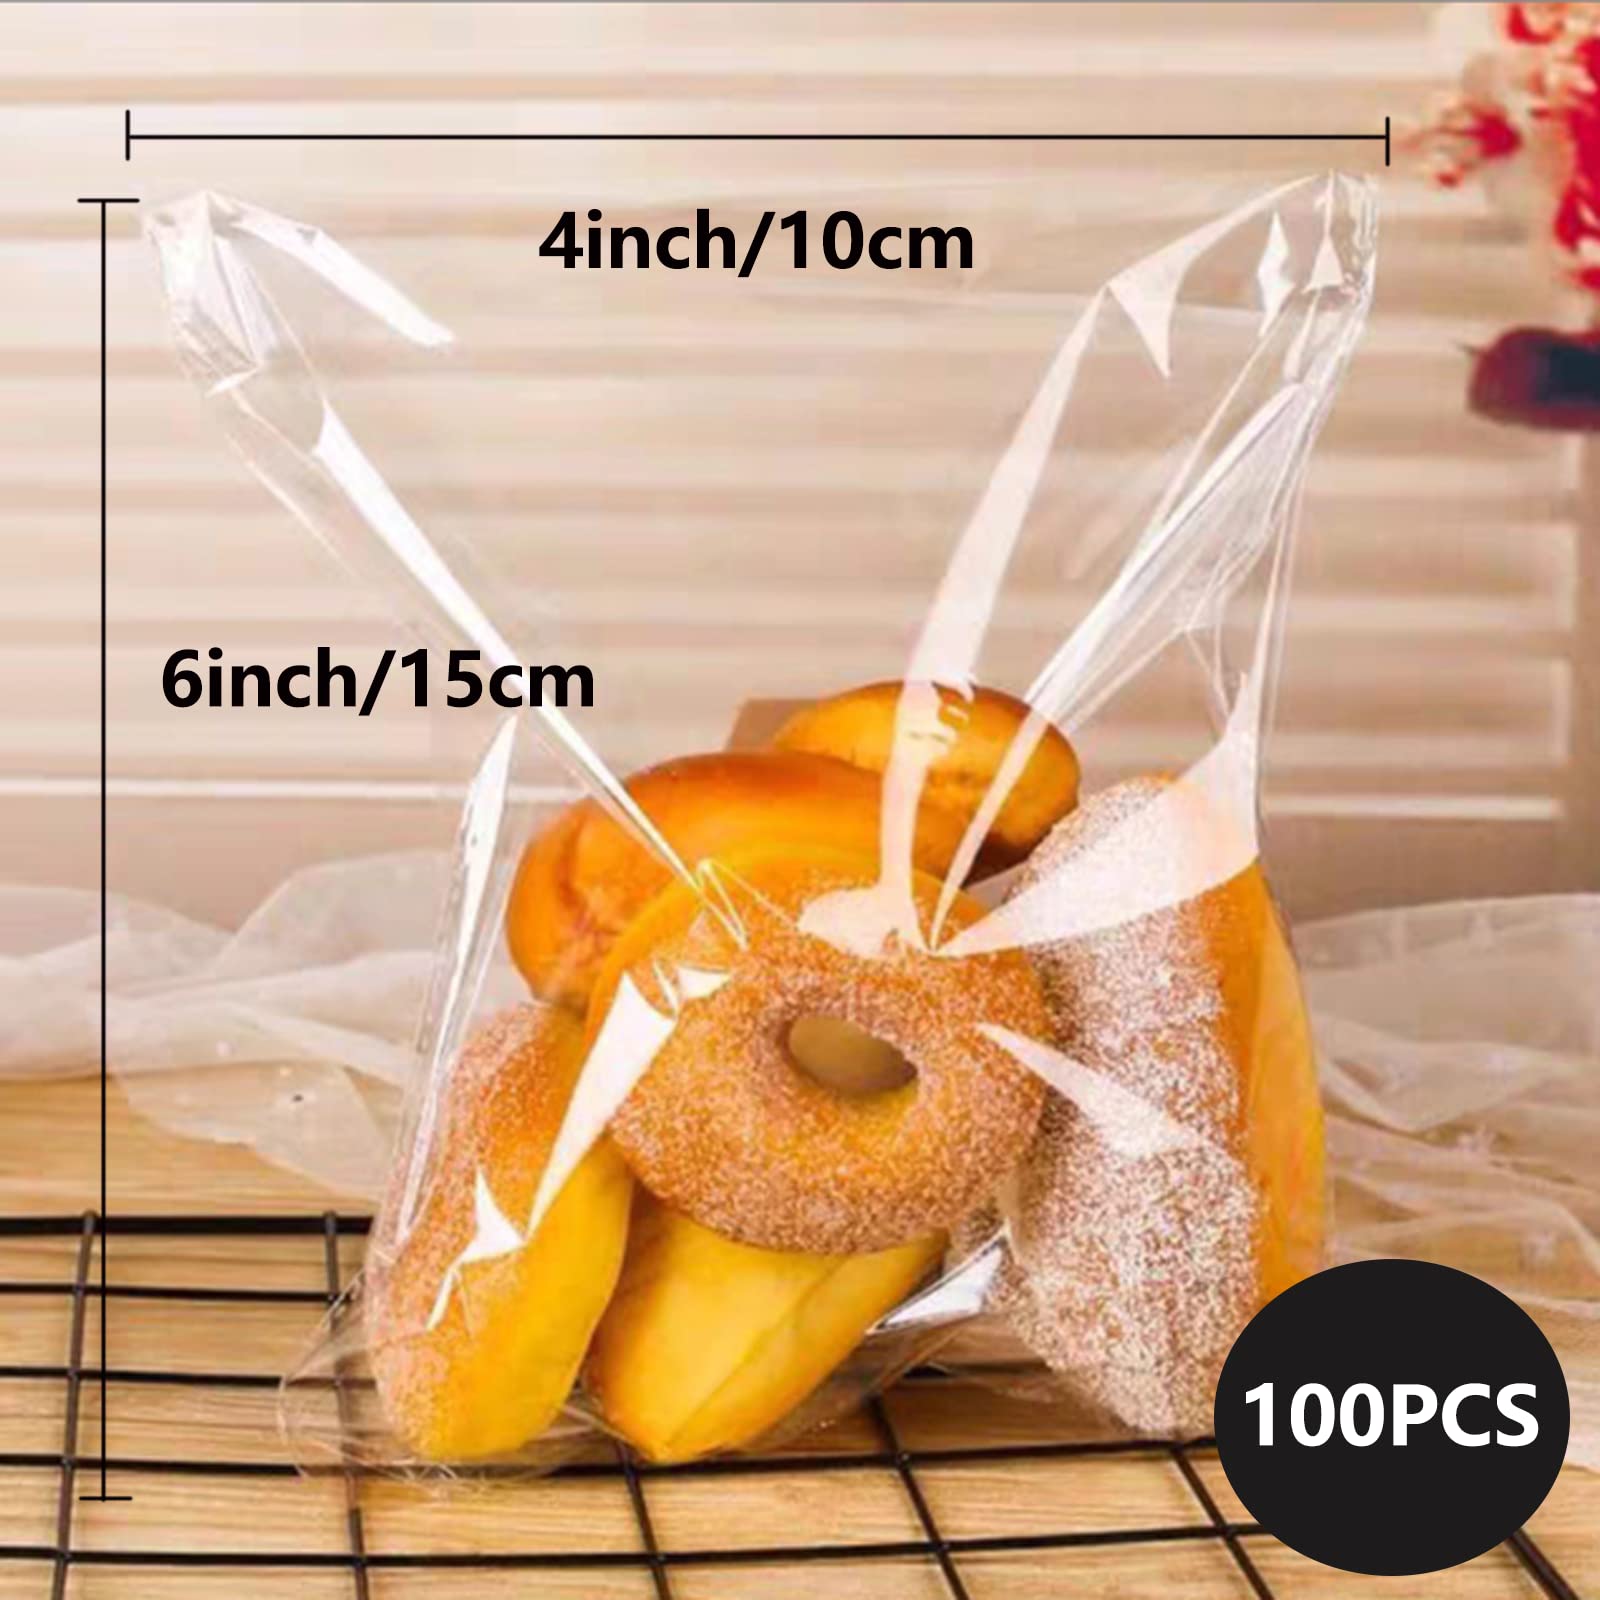 Cellophane Bags Pack of 100 (6 x 9 Inches) - Small Cellophane Sweets Cookies Bags, Self Seal Clear Adhesive Plastic Bags for Cookies, Sweets, Gifts, Jewellery, Soap, Chocolates